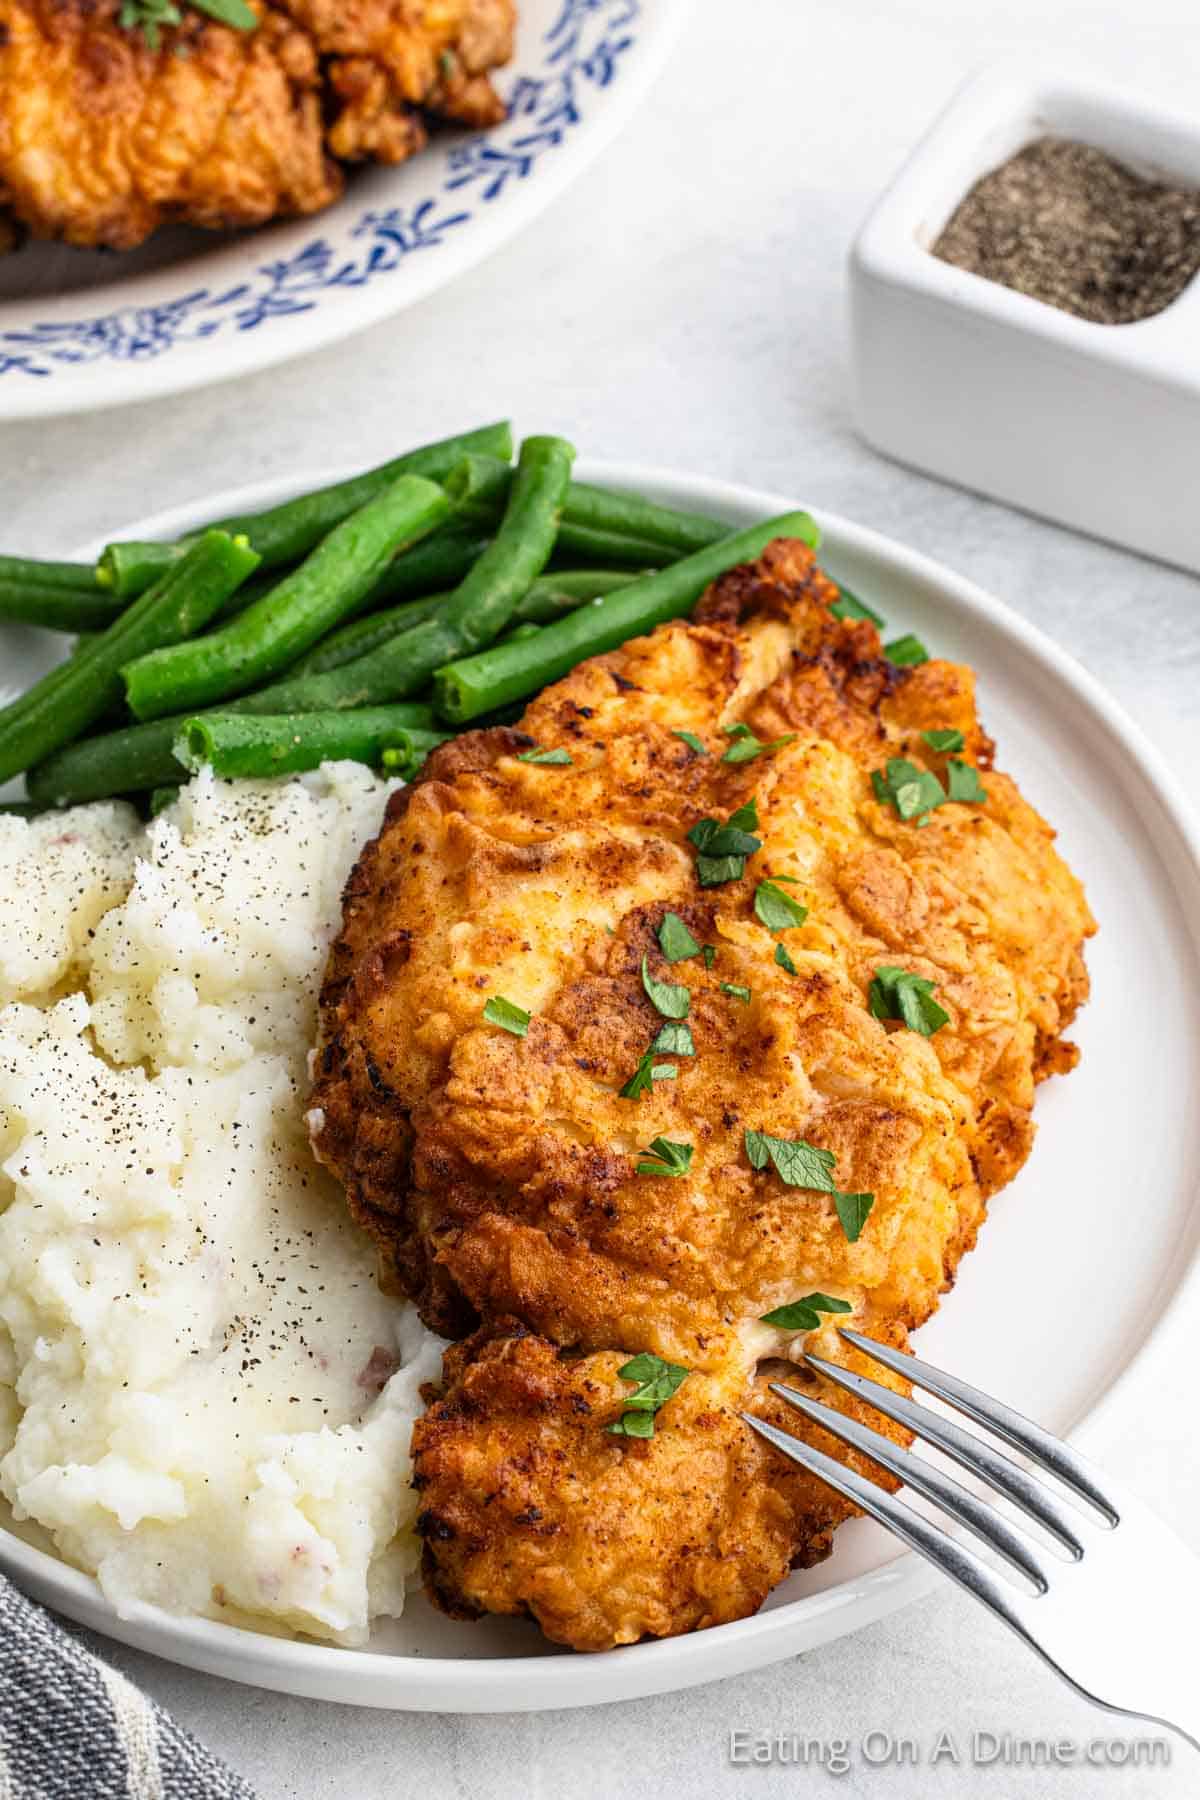 Fried chicken breast on a plate with mashed potatoes and green beans